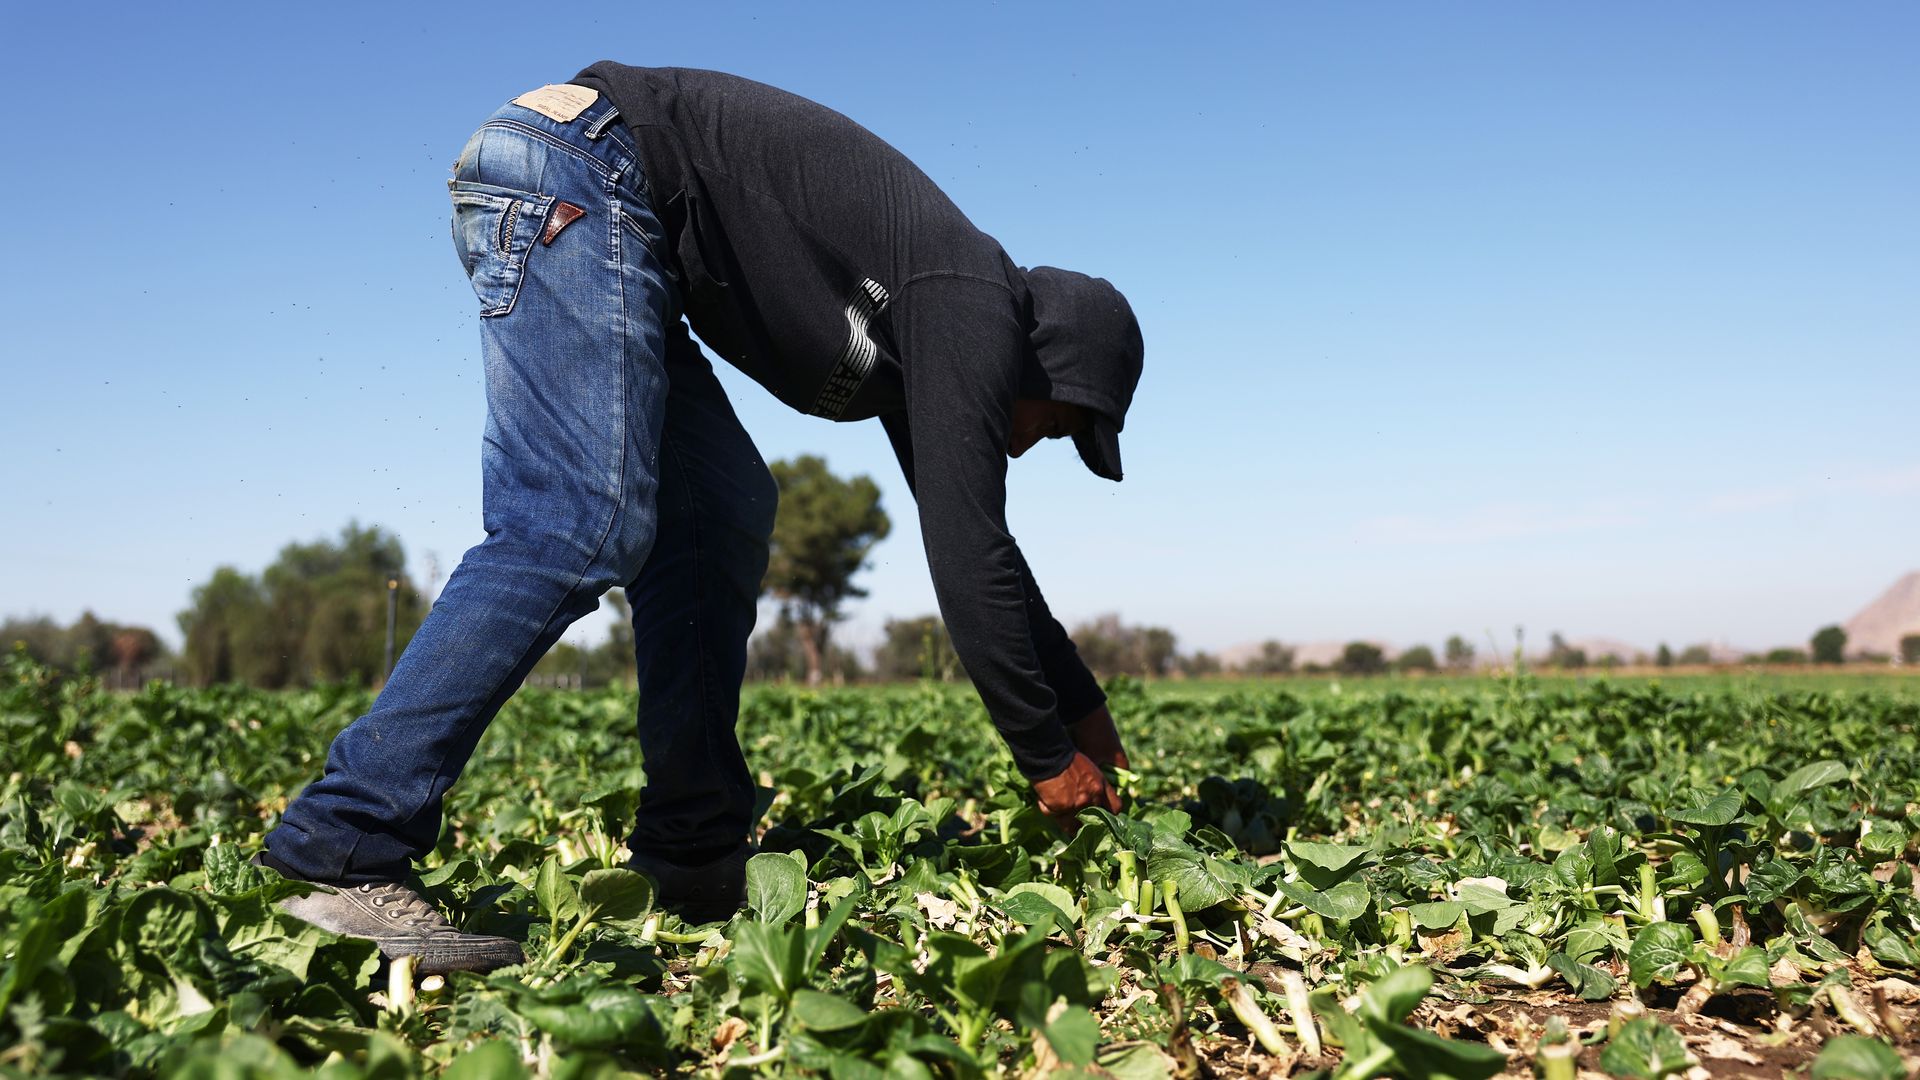 A farmworker wears protective layers while gathering produce in the summer heat, before receiving heat awareness education outreach from the TODEC Legal Center, on August 2, 2023 near Hemet, California